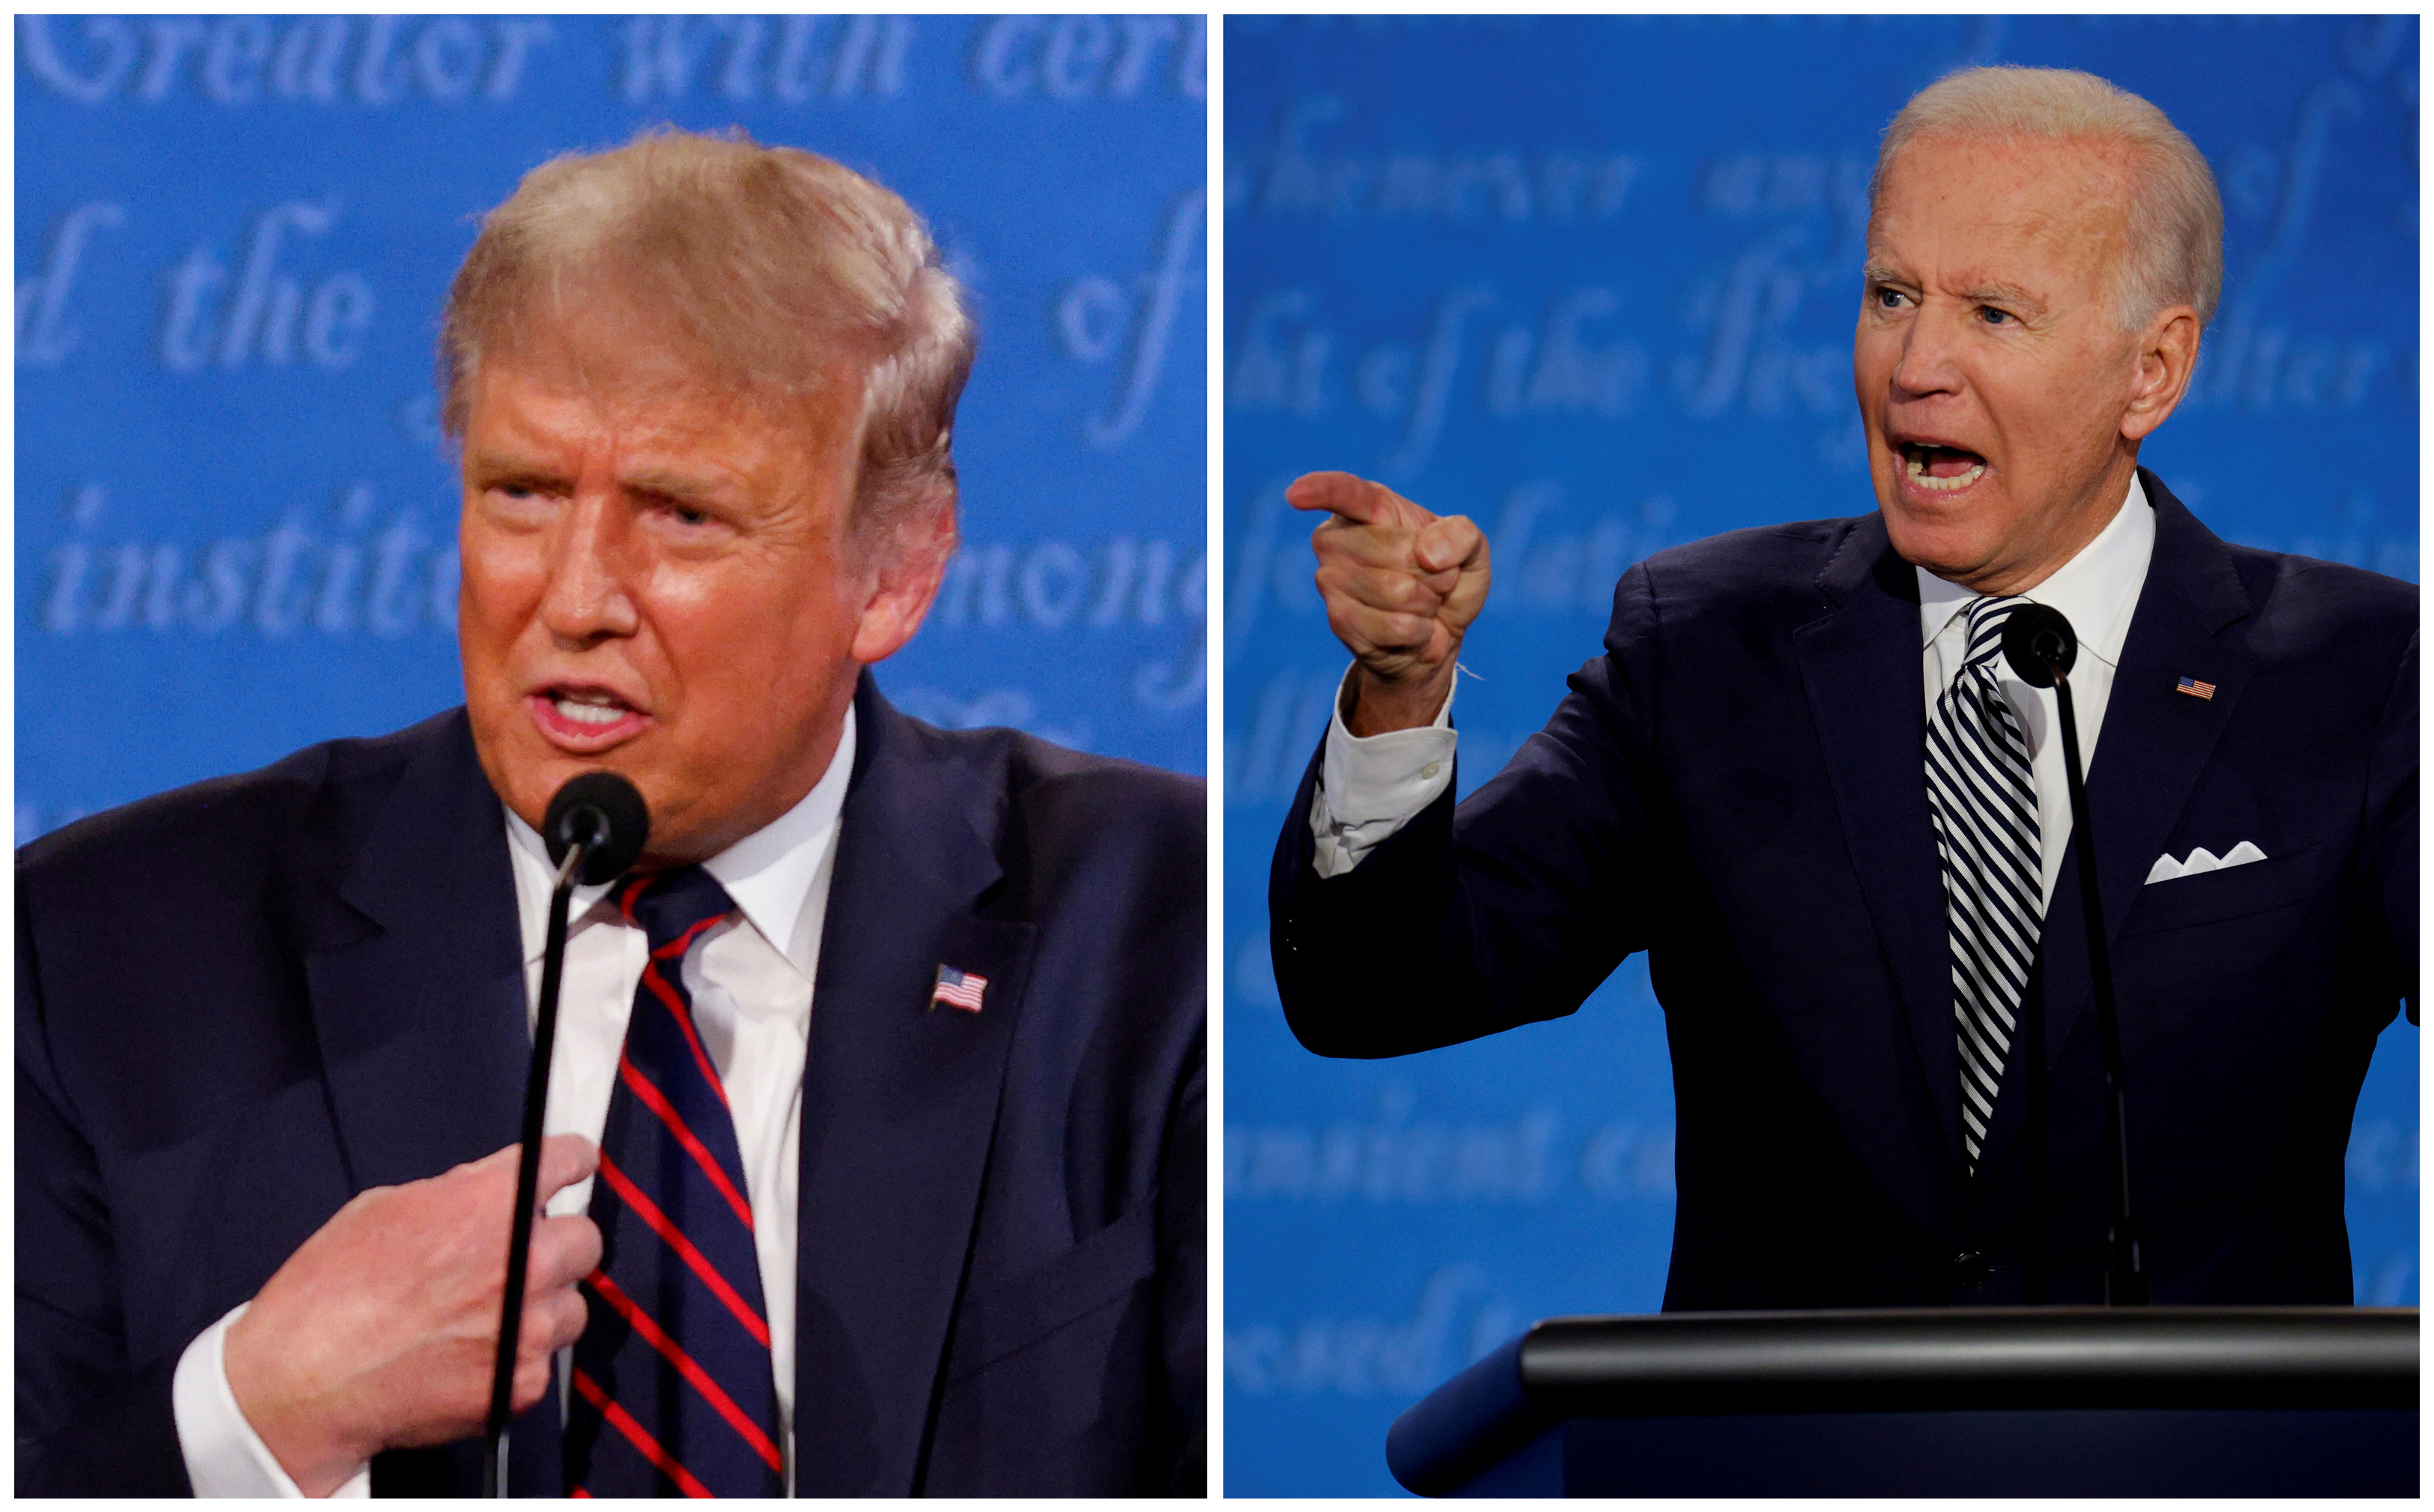 A combination picture shows U.S. President Donald Trump and Democratic presidential nominee Joe Biden during the first 2020 presidential campaign debate, in Cleveland